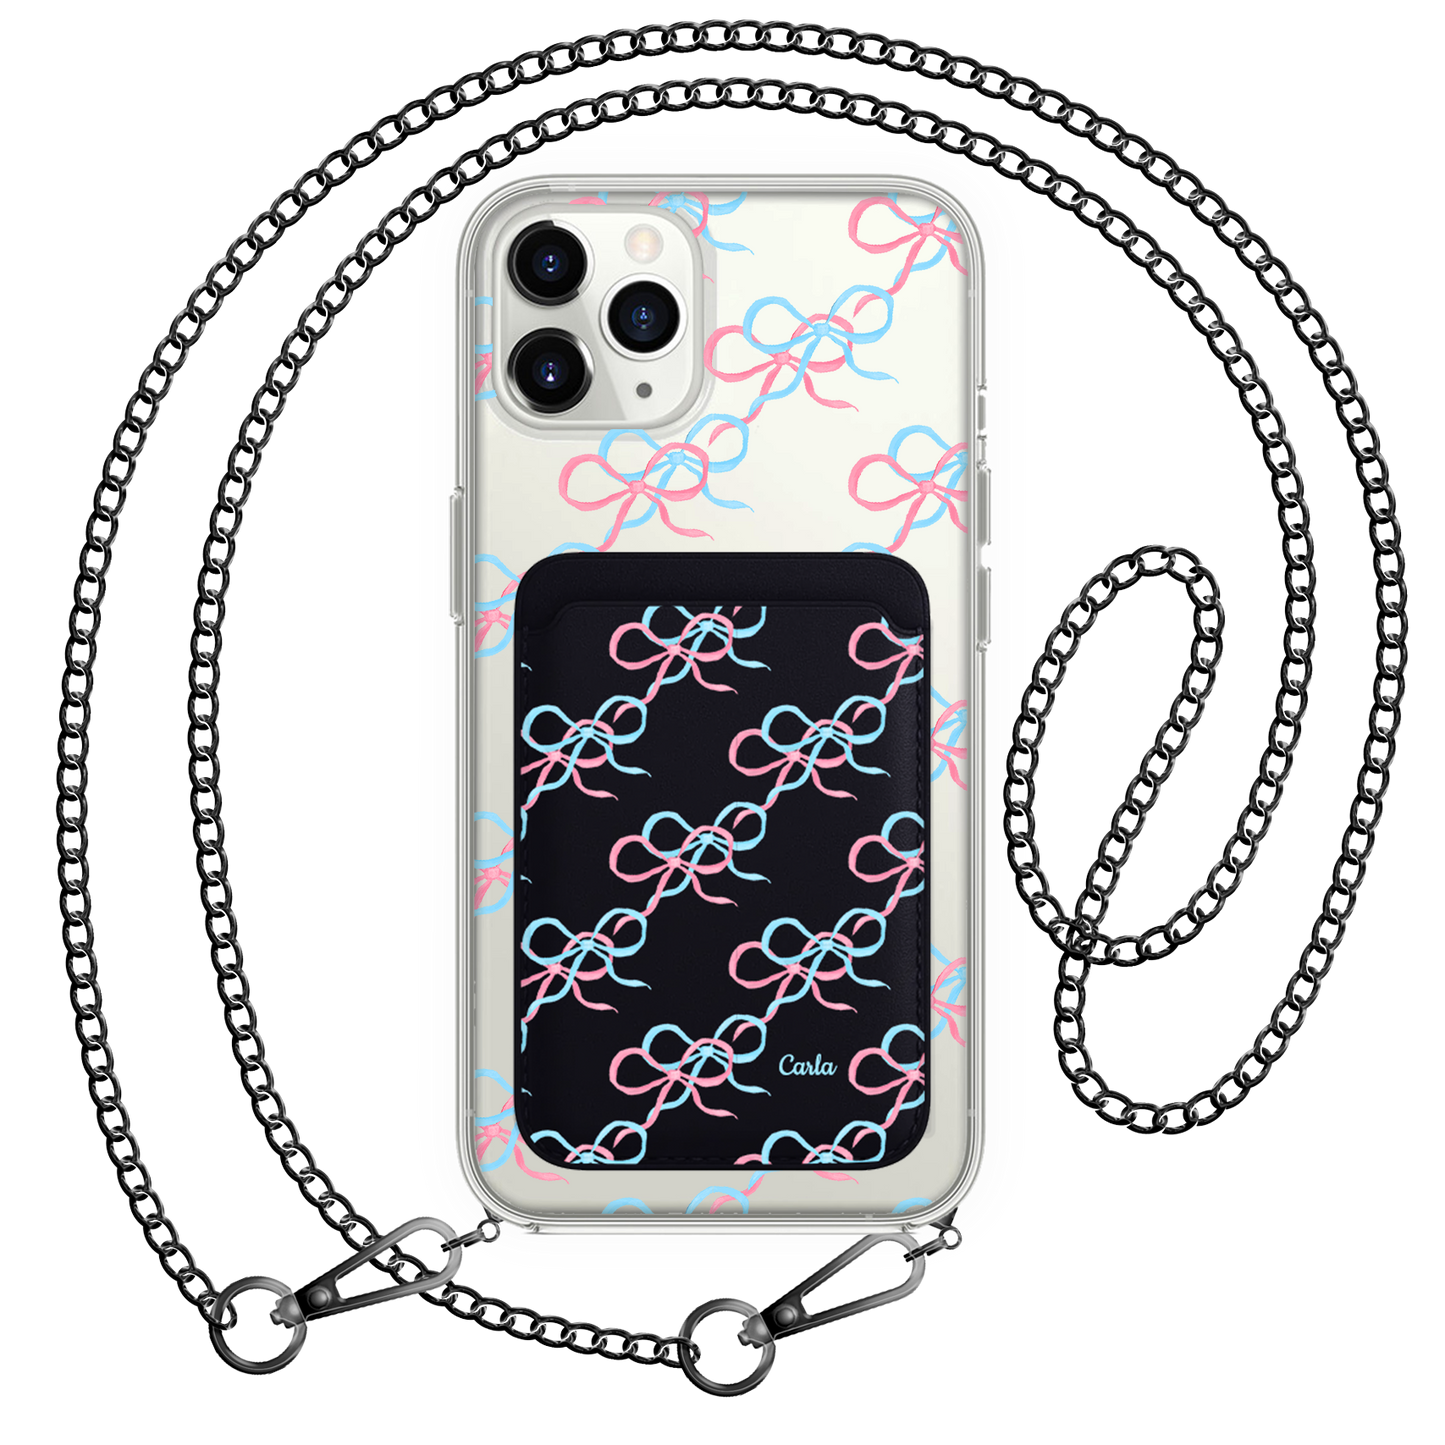 iPhone Magnetic Wallet Case - Coquette Pink & Blue Bow